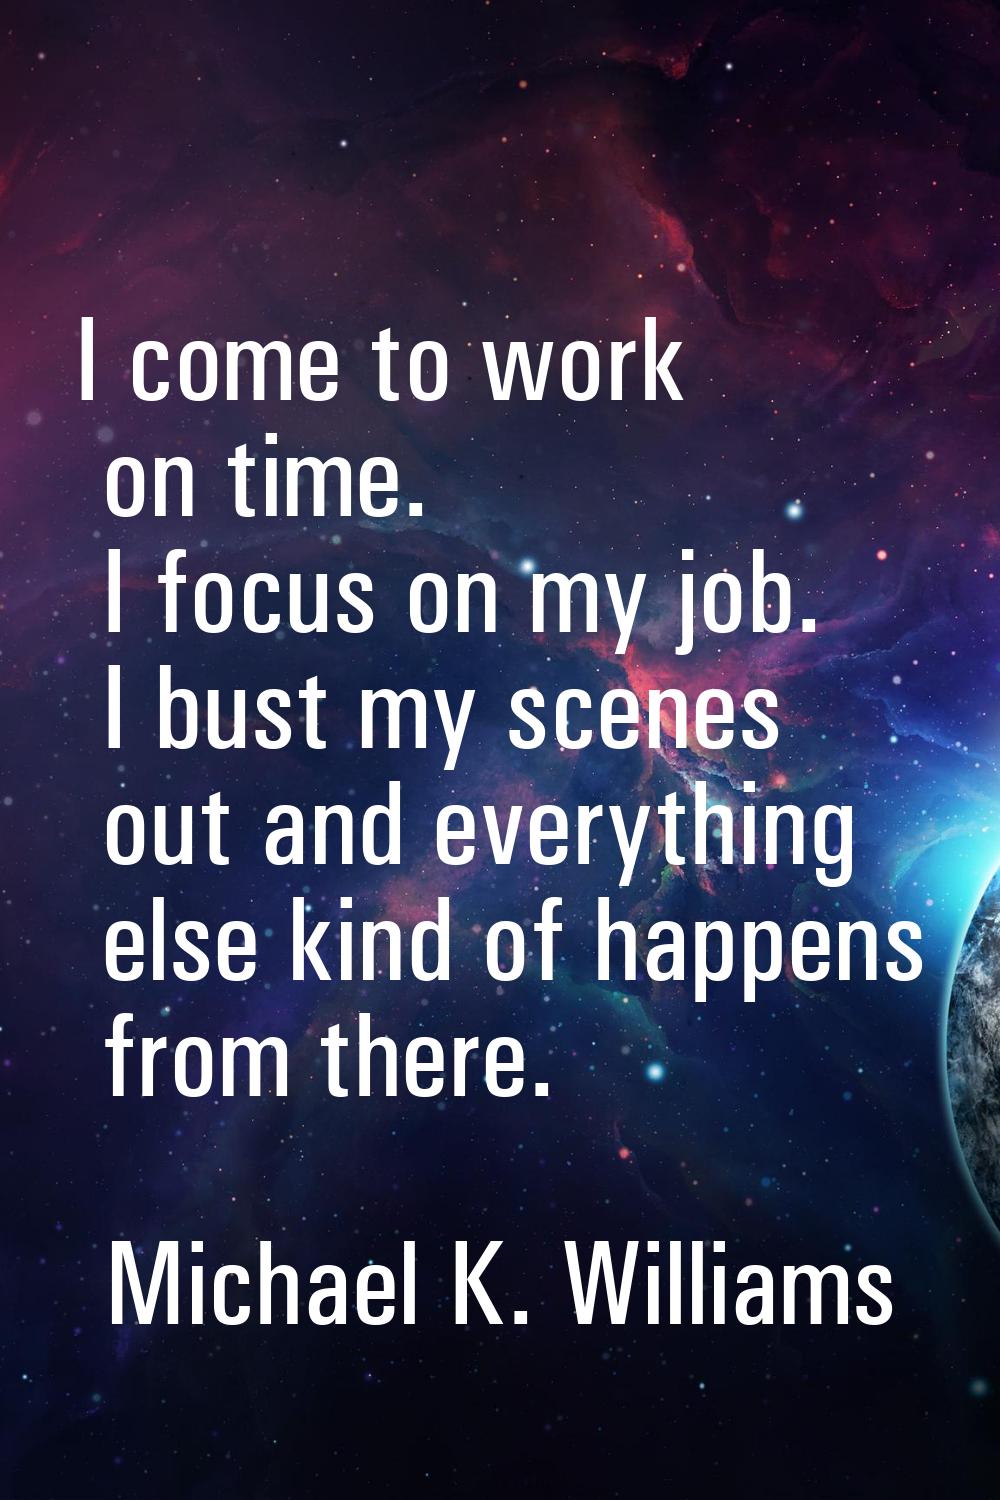 I come to work on time. I focus on my job. I bust my scenes out and everything else kind of happens